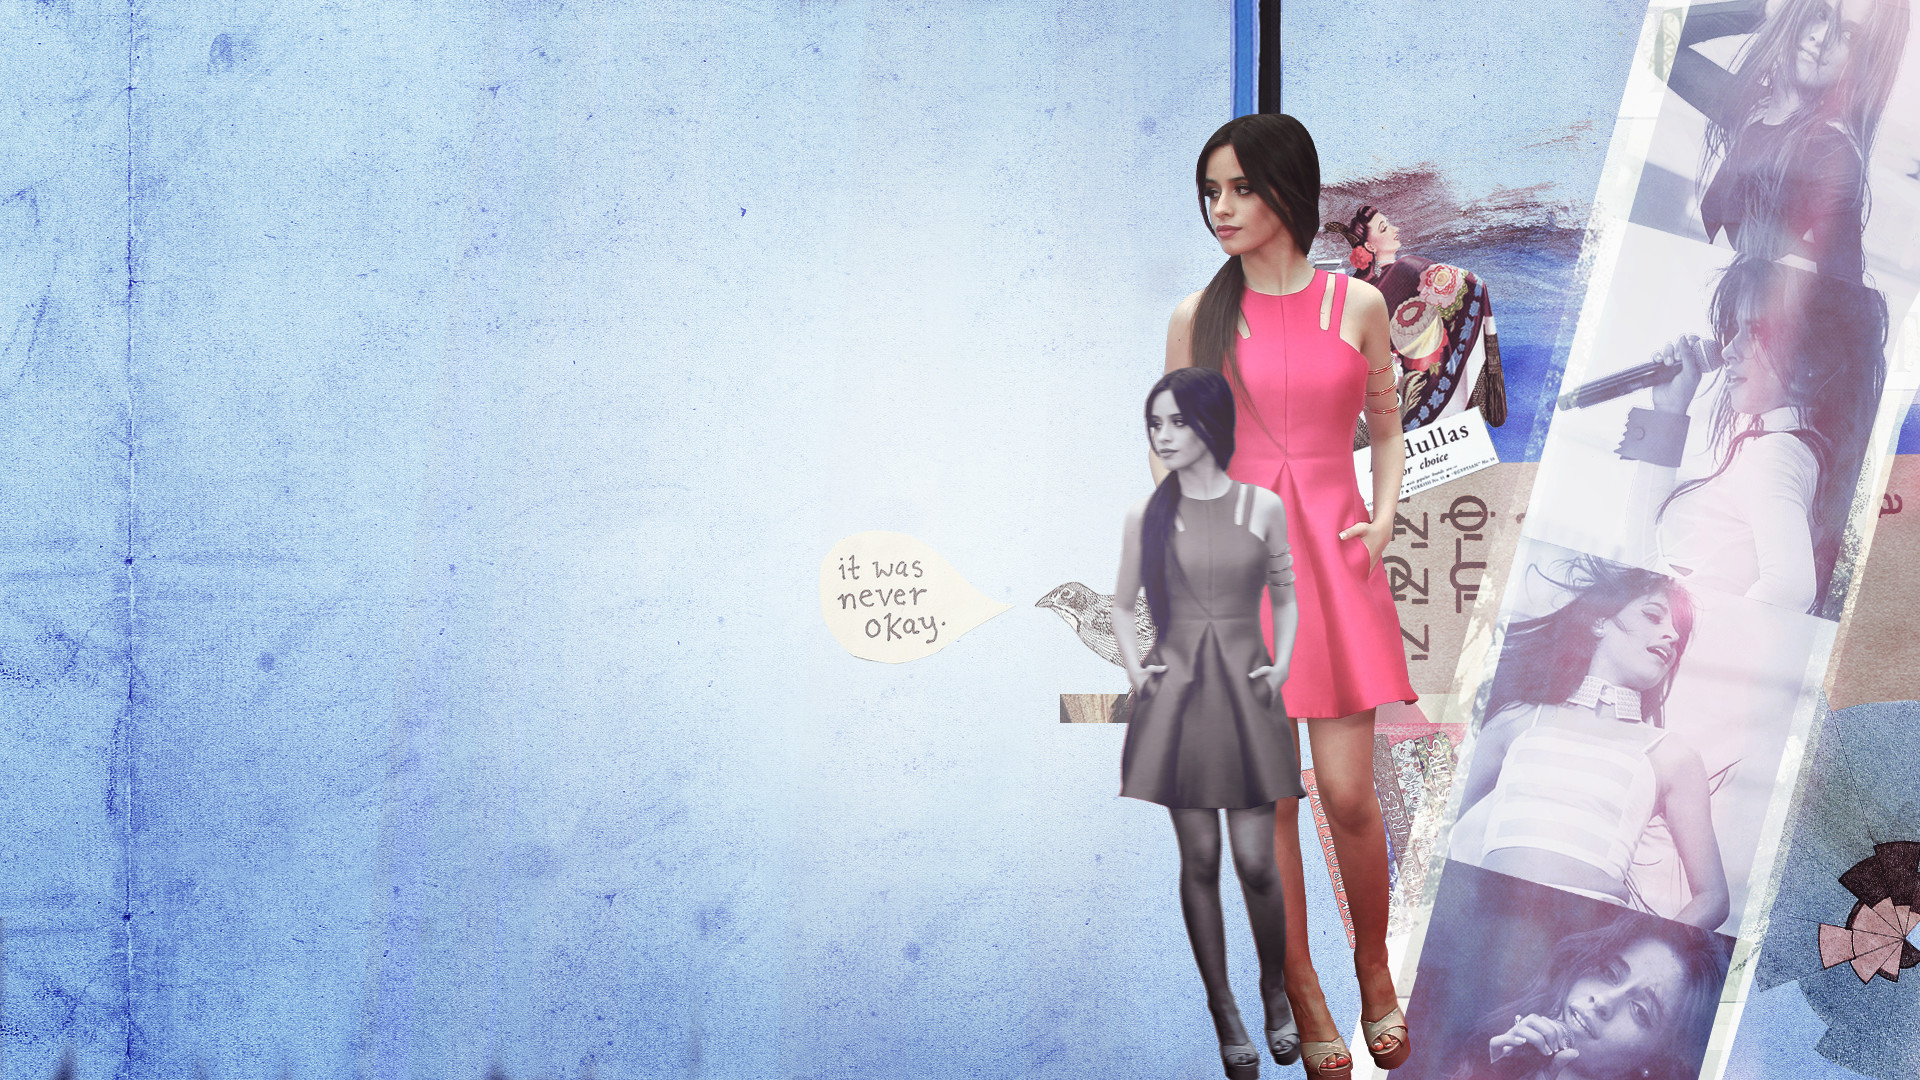 1920x1080 ... Camila Cabello Blue and Pink Wallpaper by beLIEve91